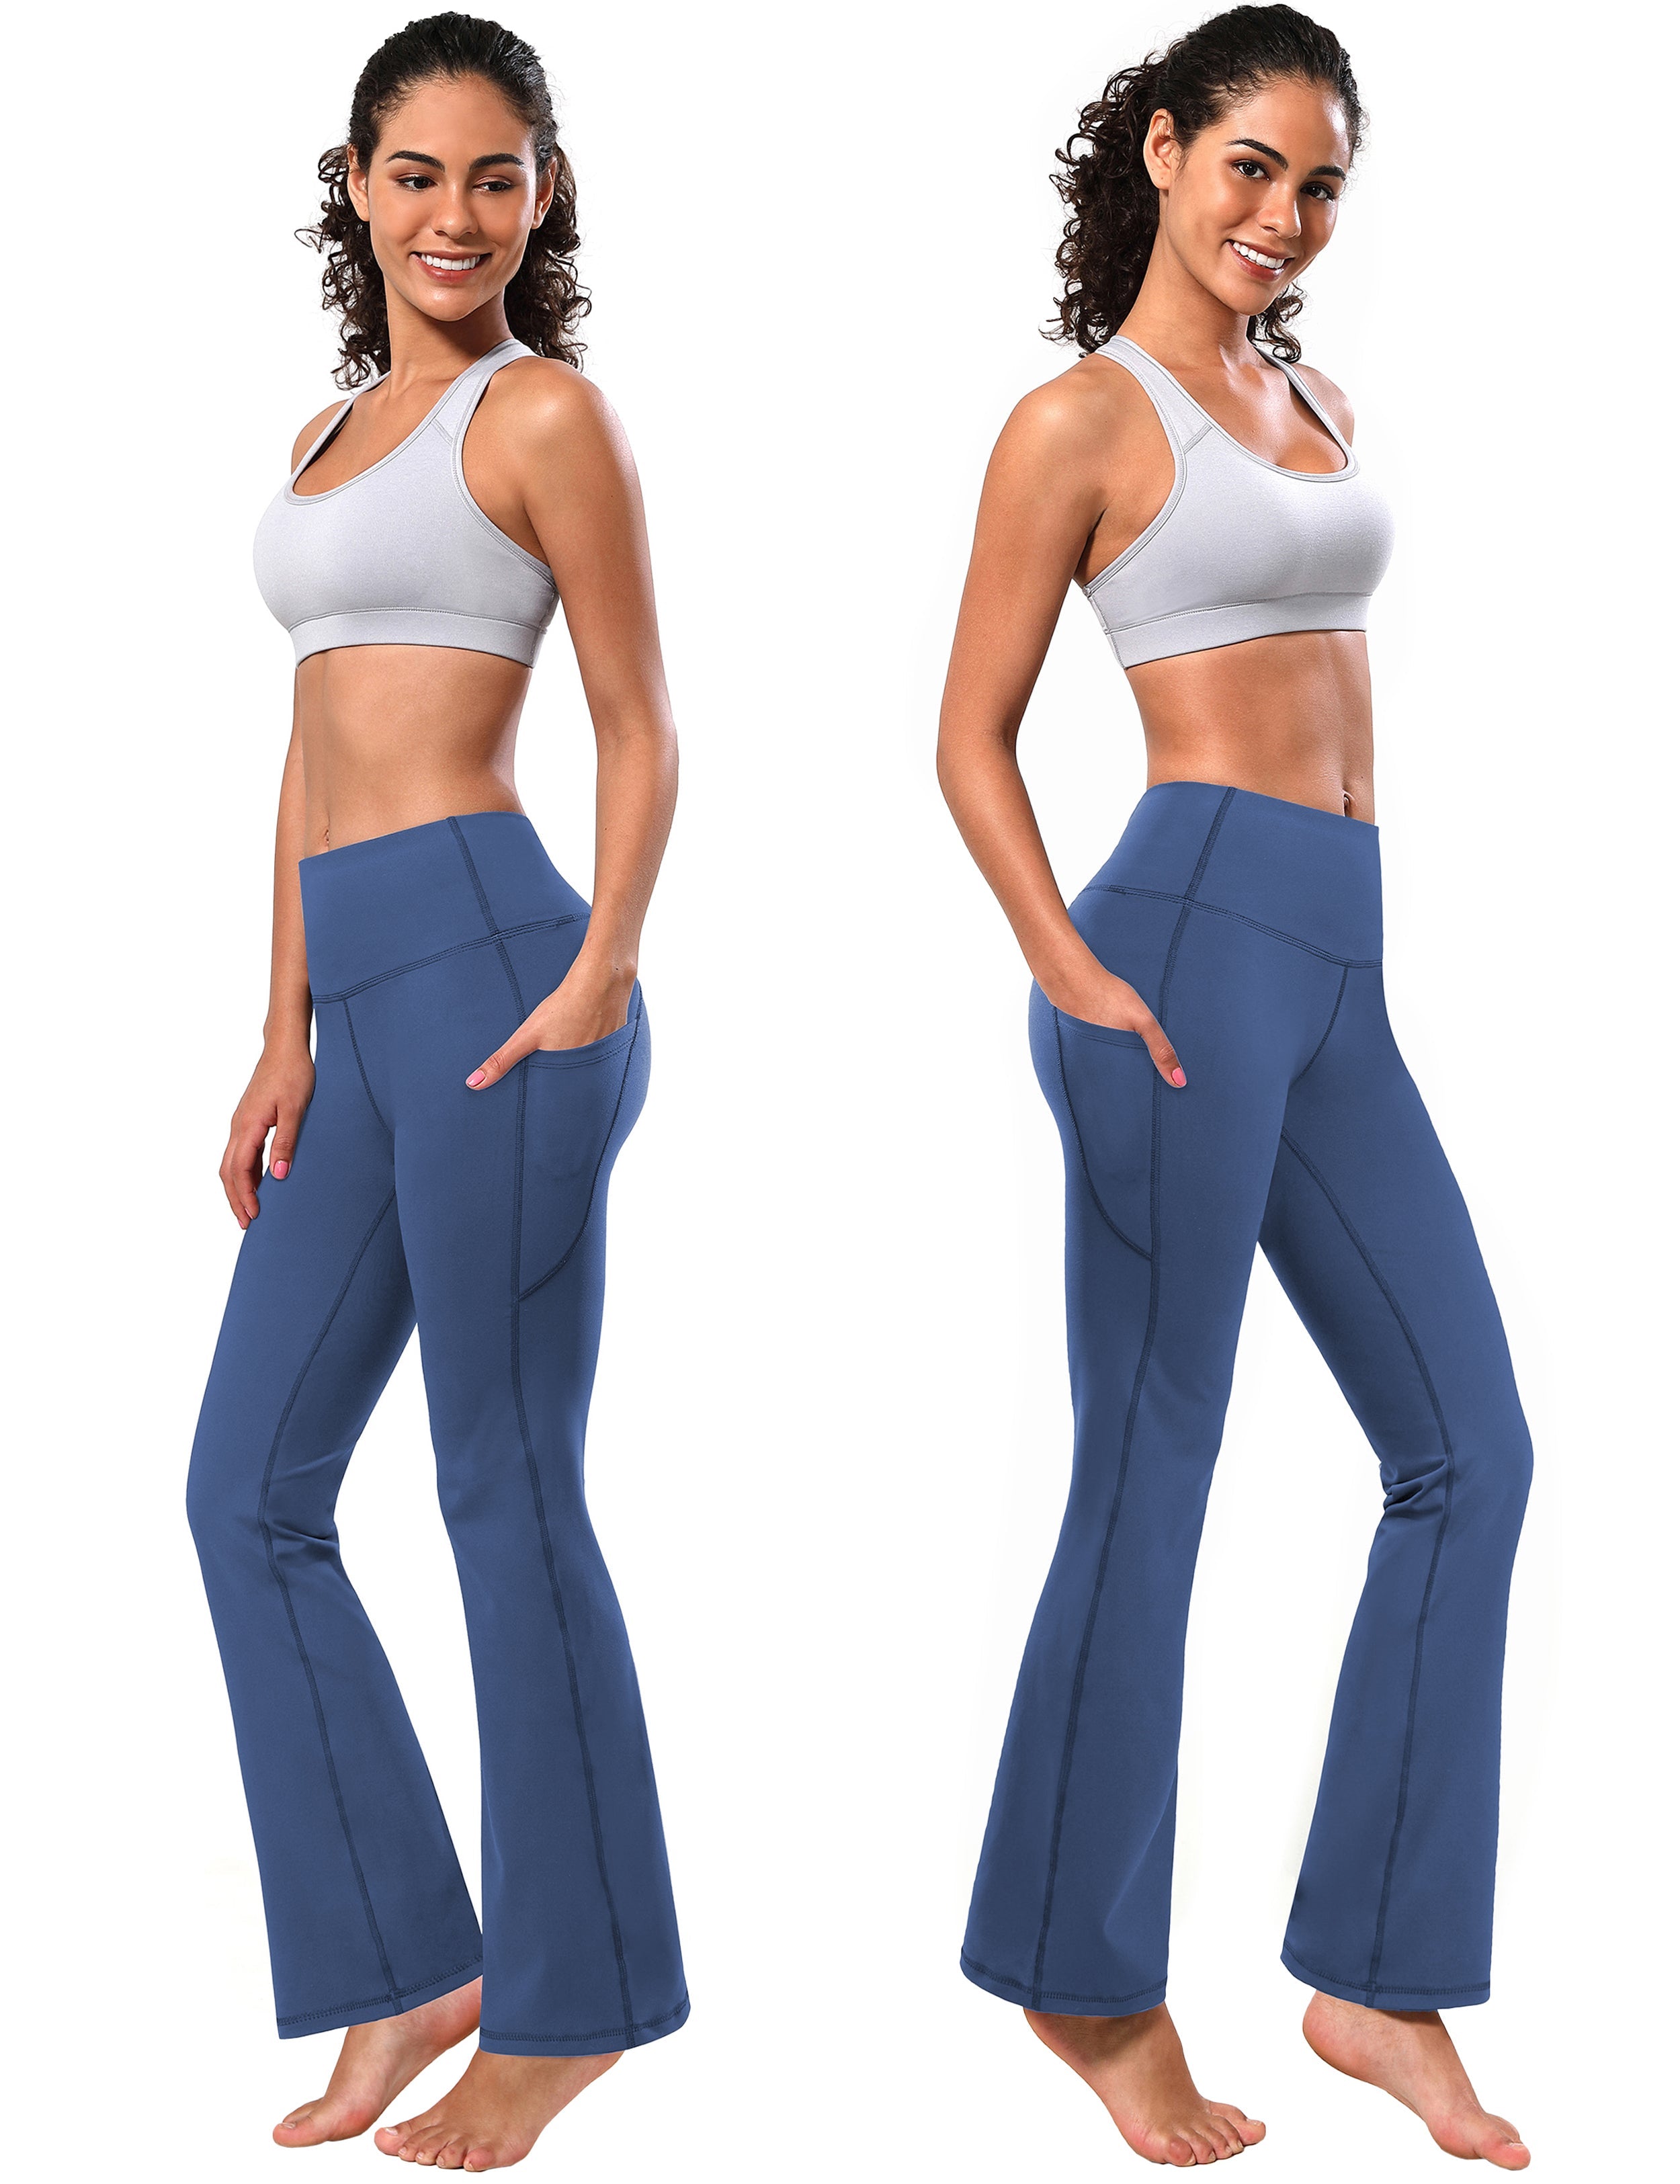 139 Side Pockets Bootcut Leggings purplishblue 87%Nylon/13%Spandex Fabric doesn't attract lint easily 4-way stretch No see-through Moisture-wicking Tummy control Inner pocket Four lengths